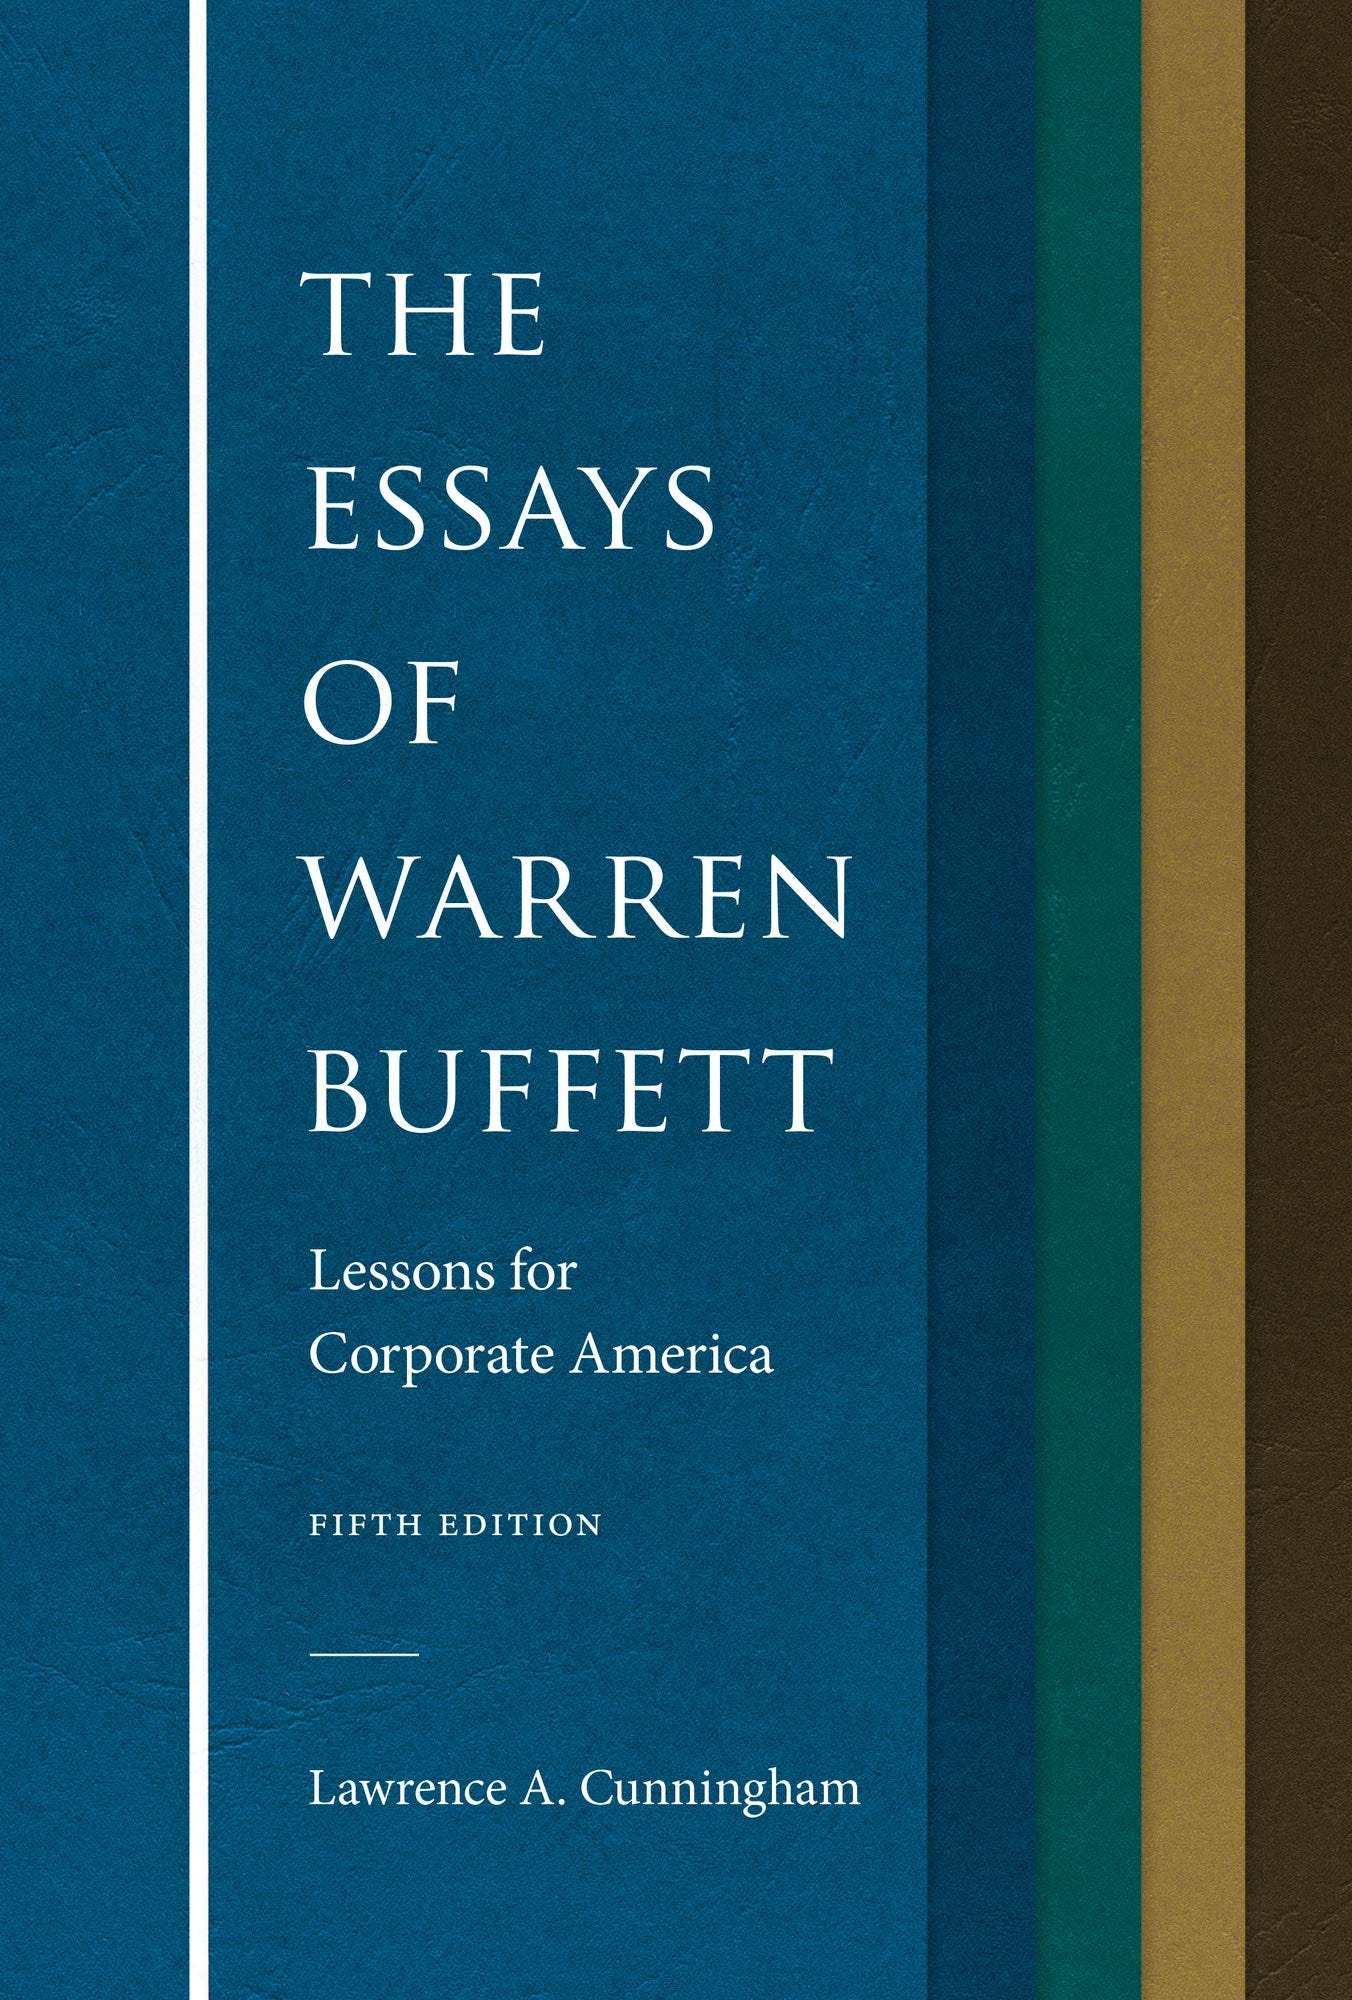 The Essays of Warren Buffett: Lessons for Corporate America, Fifth Edition  - Kindle edition by Cunningham, Lawrence A., Buffett, Warren E..  Professional &amp; Technical Kindle eBooks @ Amazon.com.